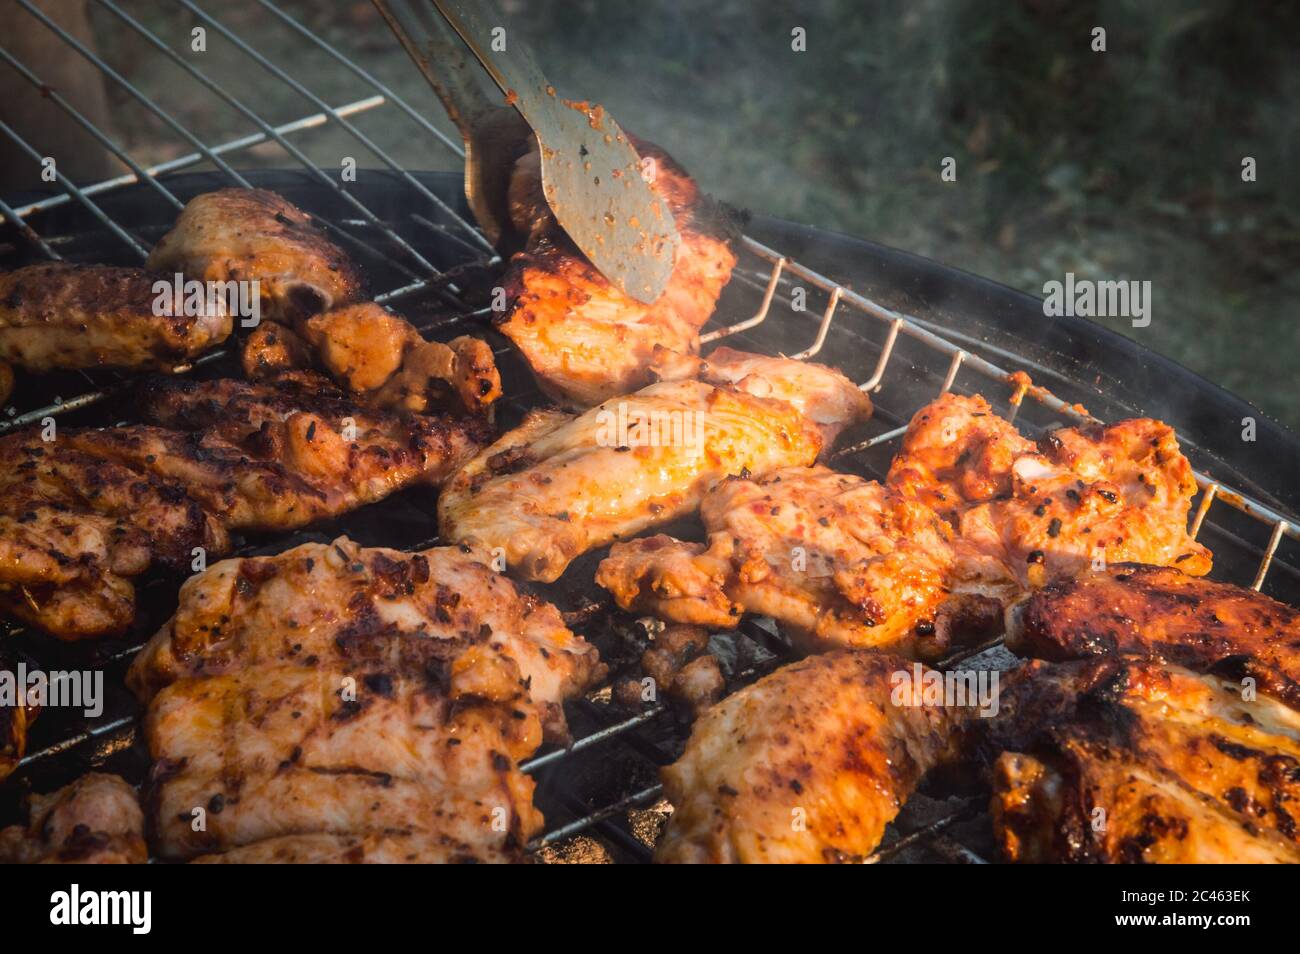 Flipping a barbecued chicken meat with tongs on a charcoal barbeque grill. Tasty snack party. Stock Photo